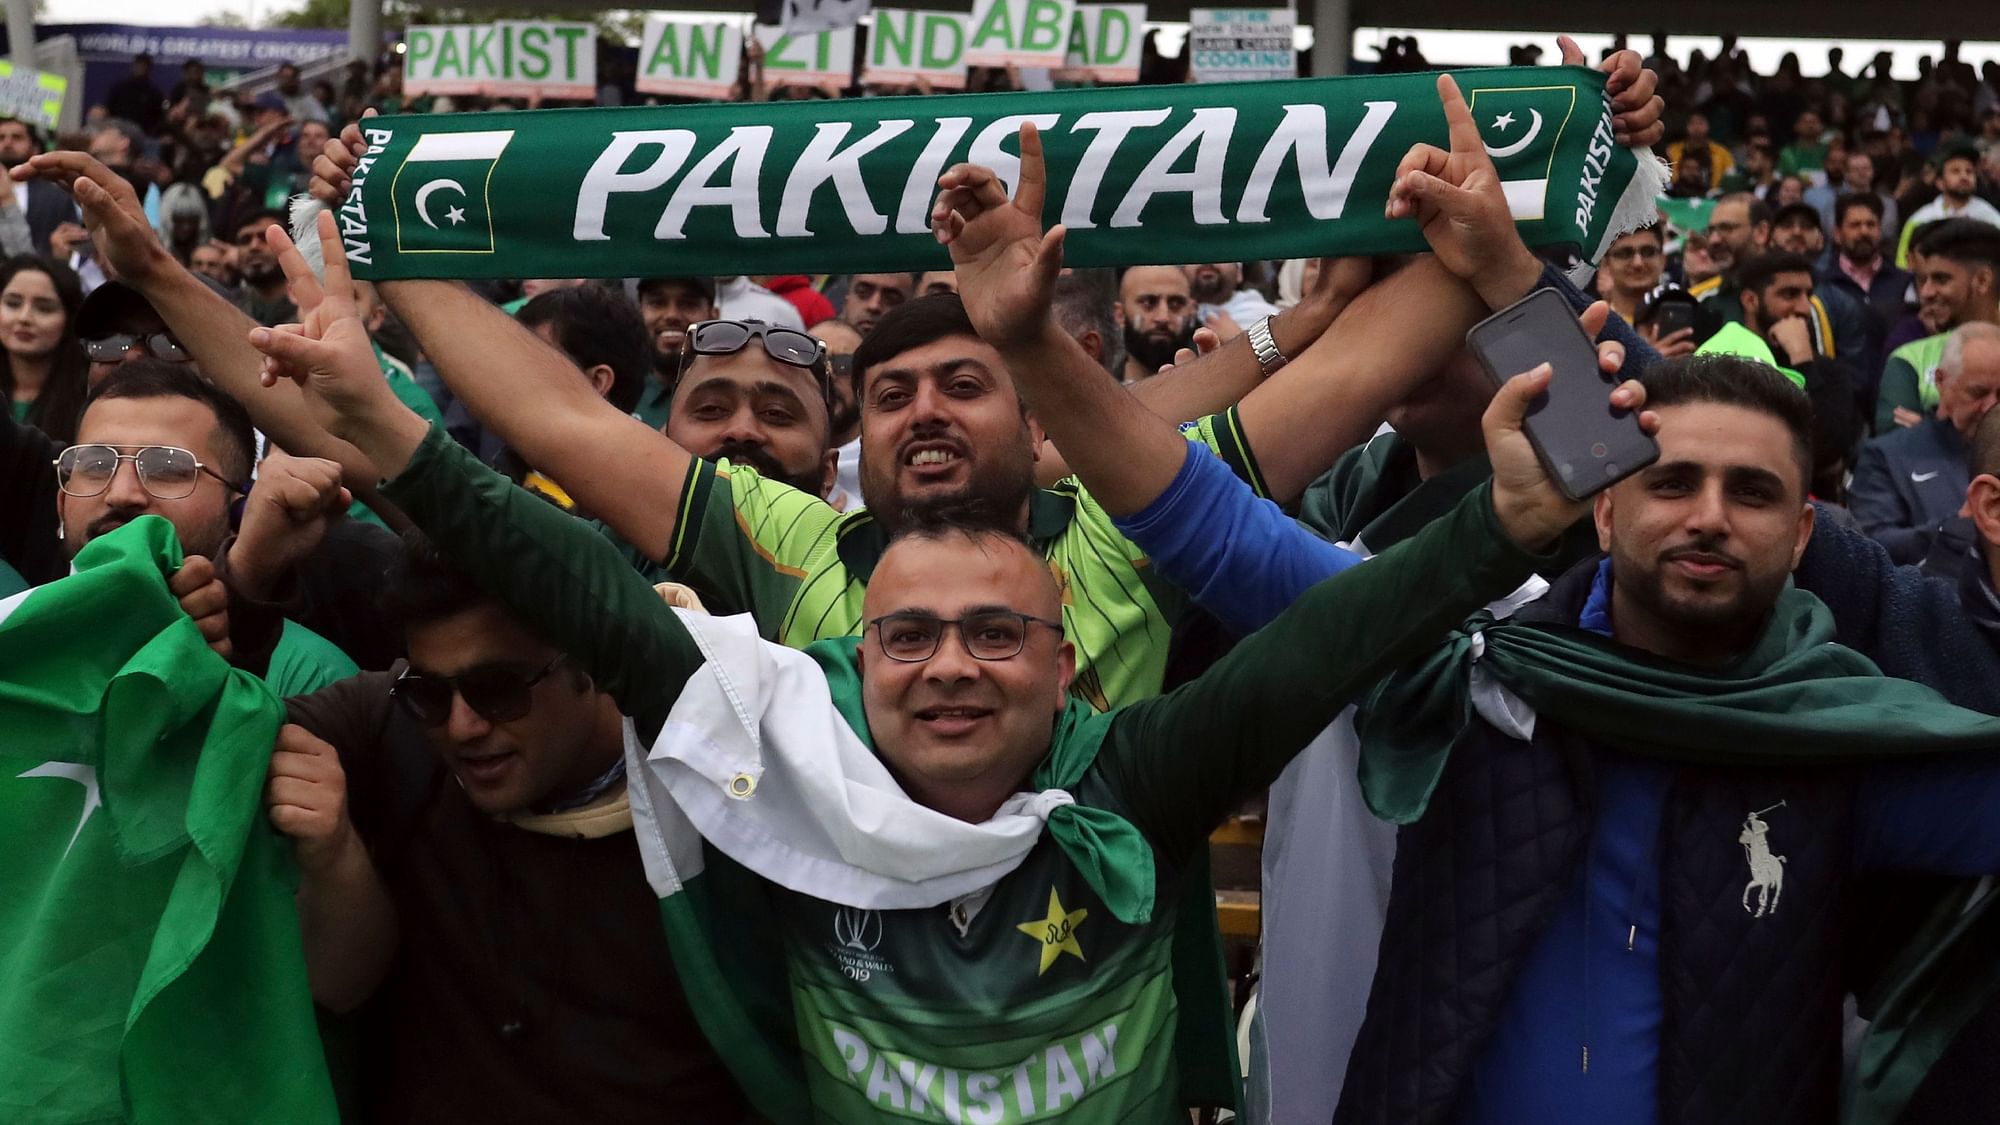 Pakistan fans before the start of the Cricket World Cup match between New Zealand and Pakistan at the Edgbaston Stadium in Birmingham.